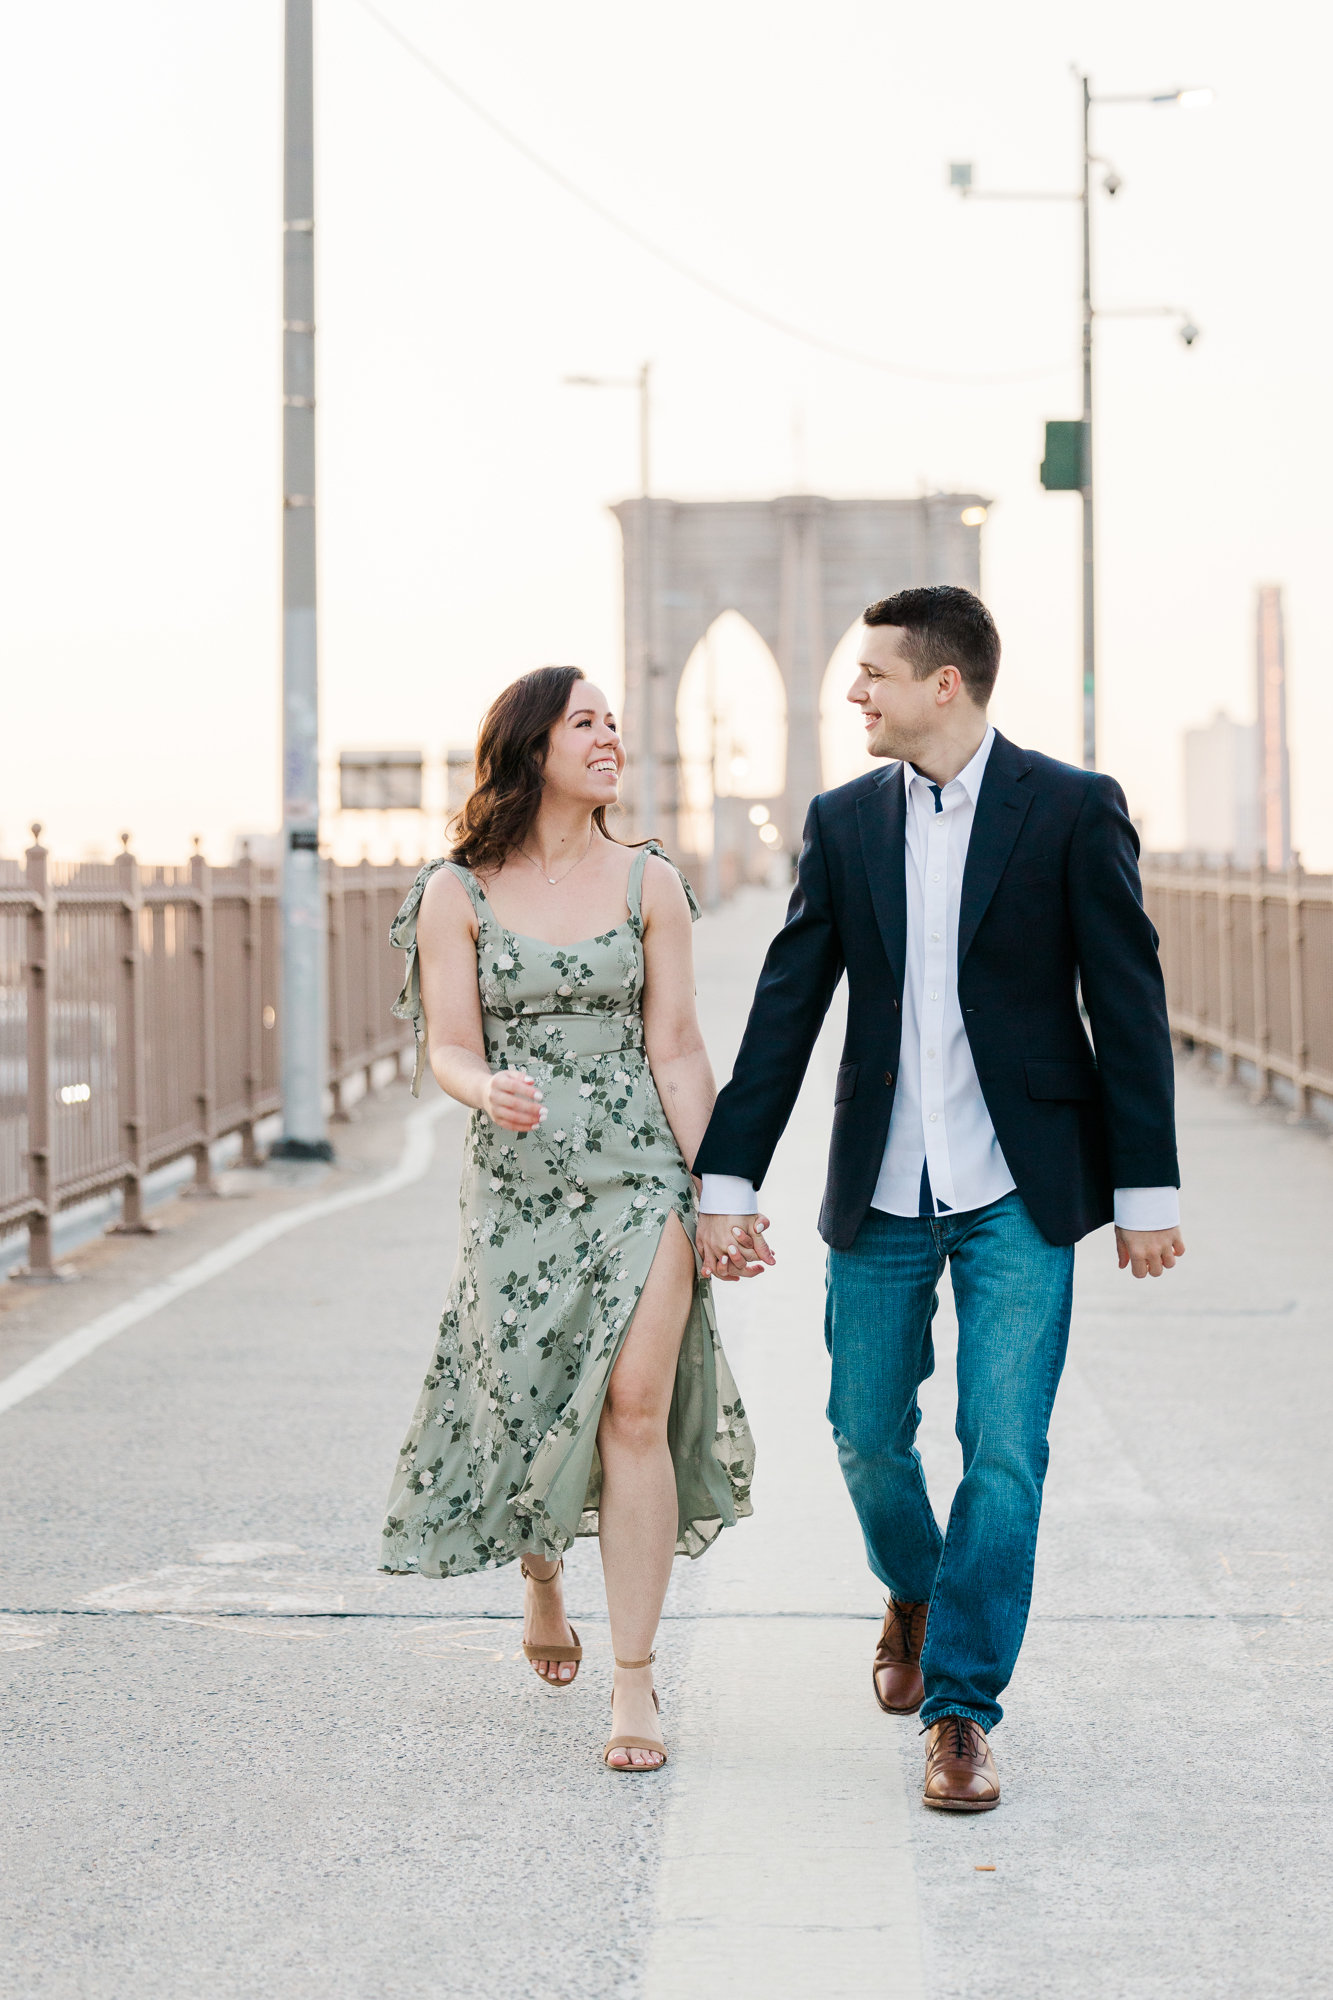 Candid Brooklyn Bridge and South Street Seaport Engagement Photography